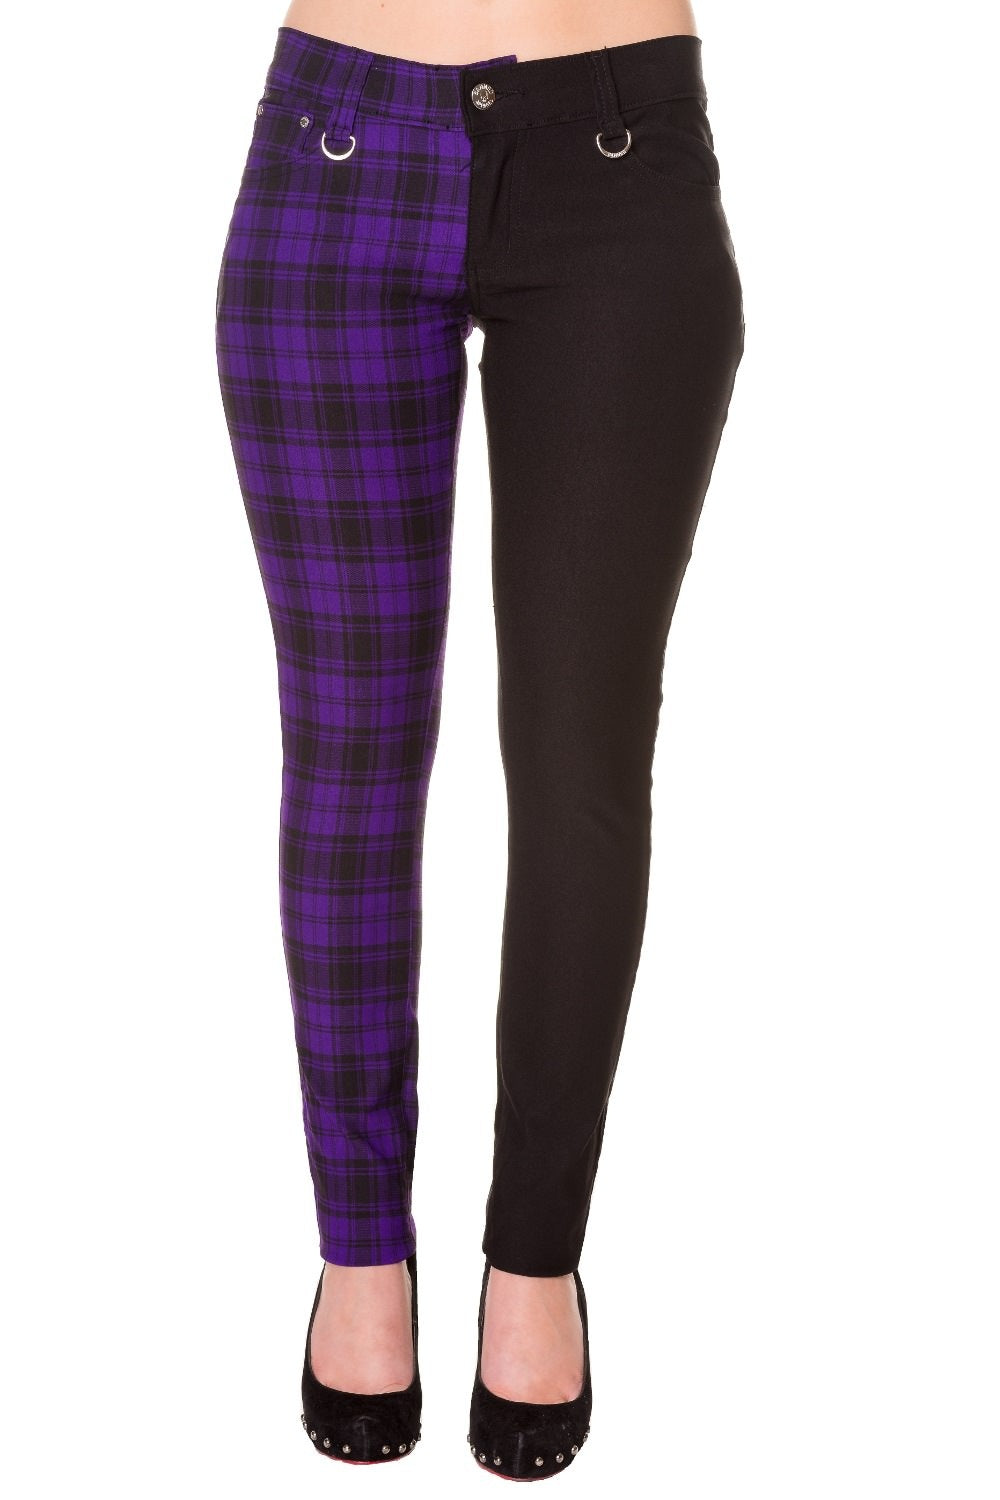 Low rise skinny jeans with one black leg and one purple check leg